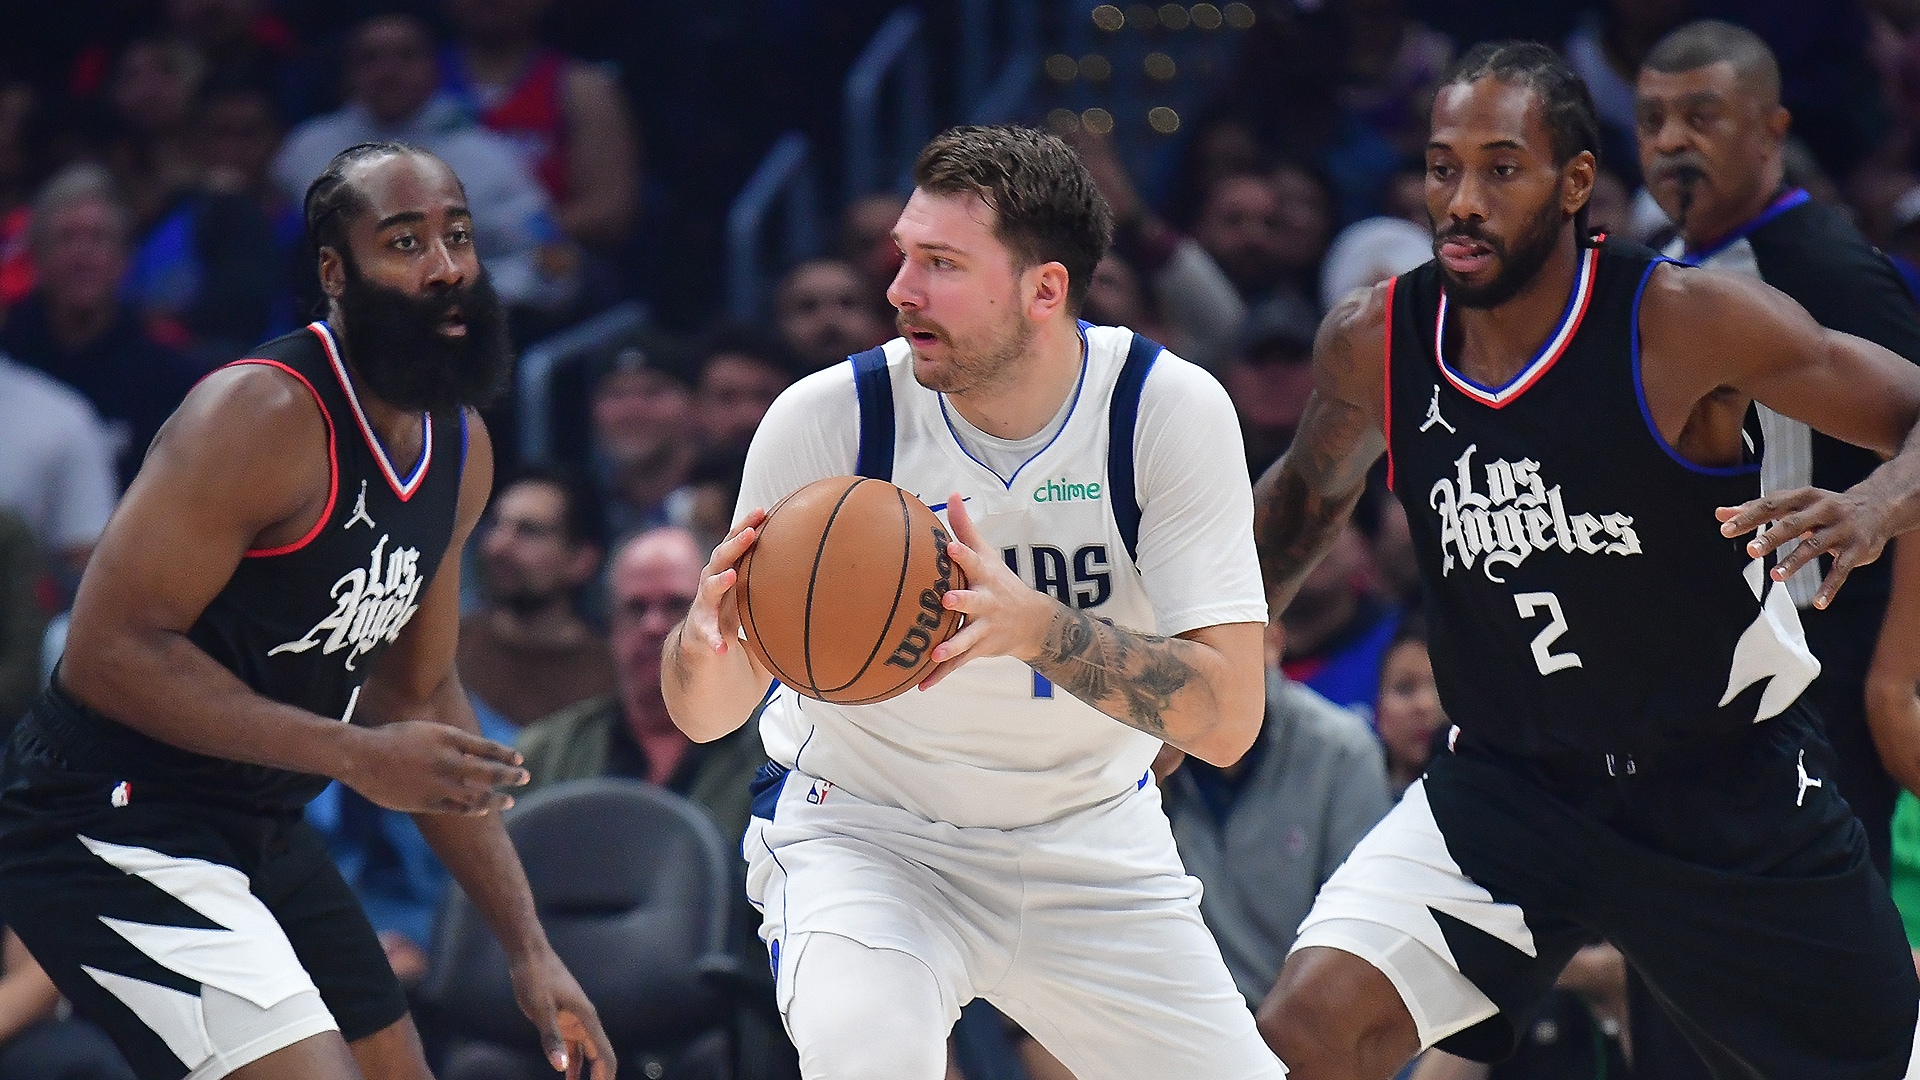 Clippers-Mavs: 5 takeaways as Mavs grab upper hand - Impact of Luka Dončić's performance on the game